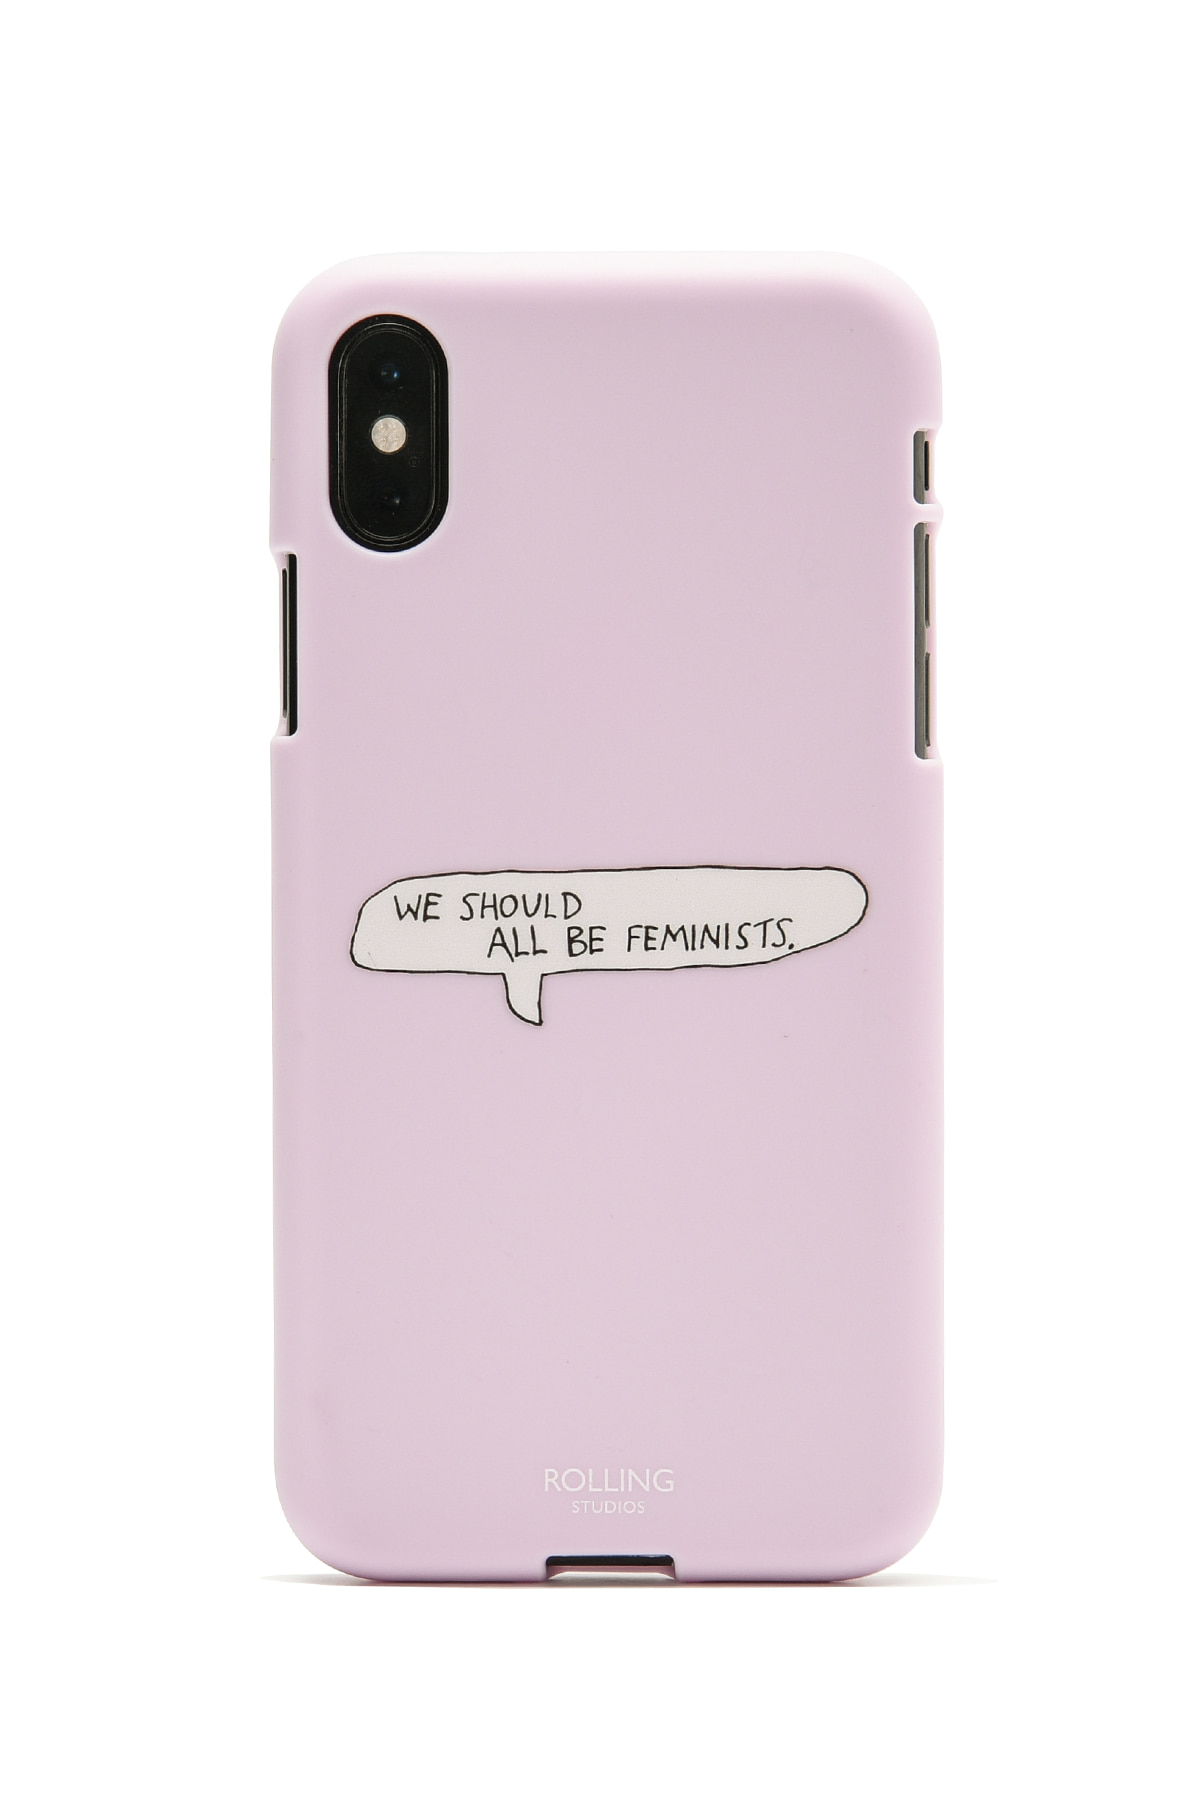 &quot;WE SHOULD ALL BE FEMINISTS&quot; Printed iPhone Case Pink